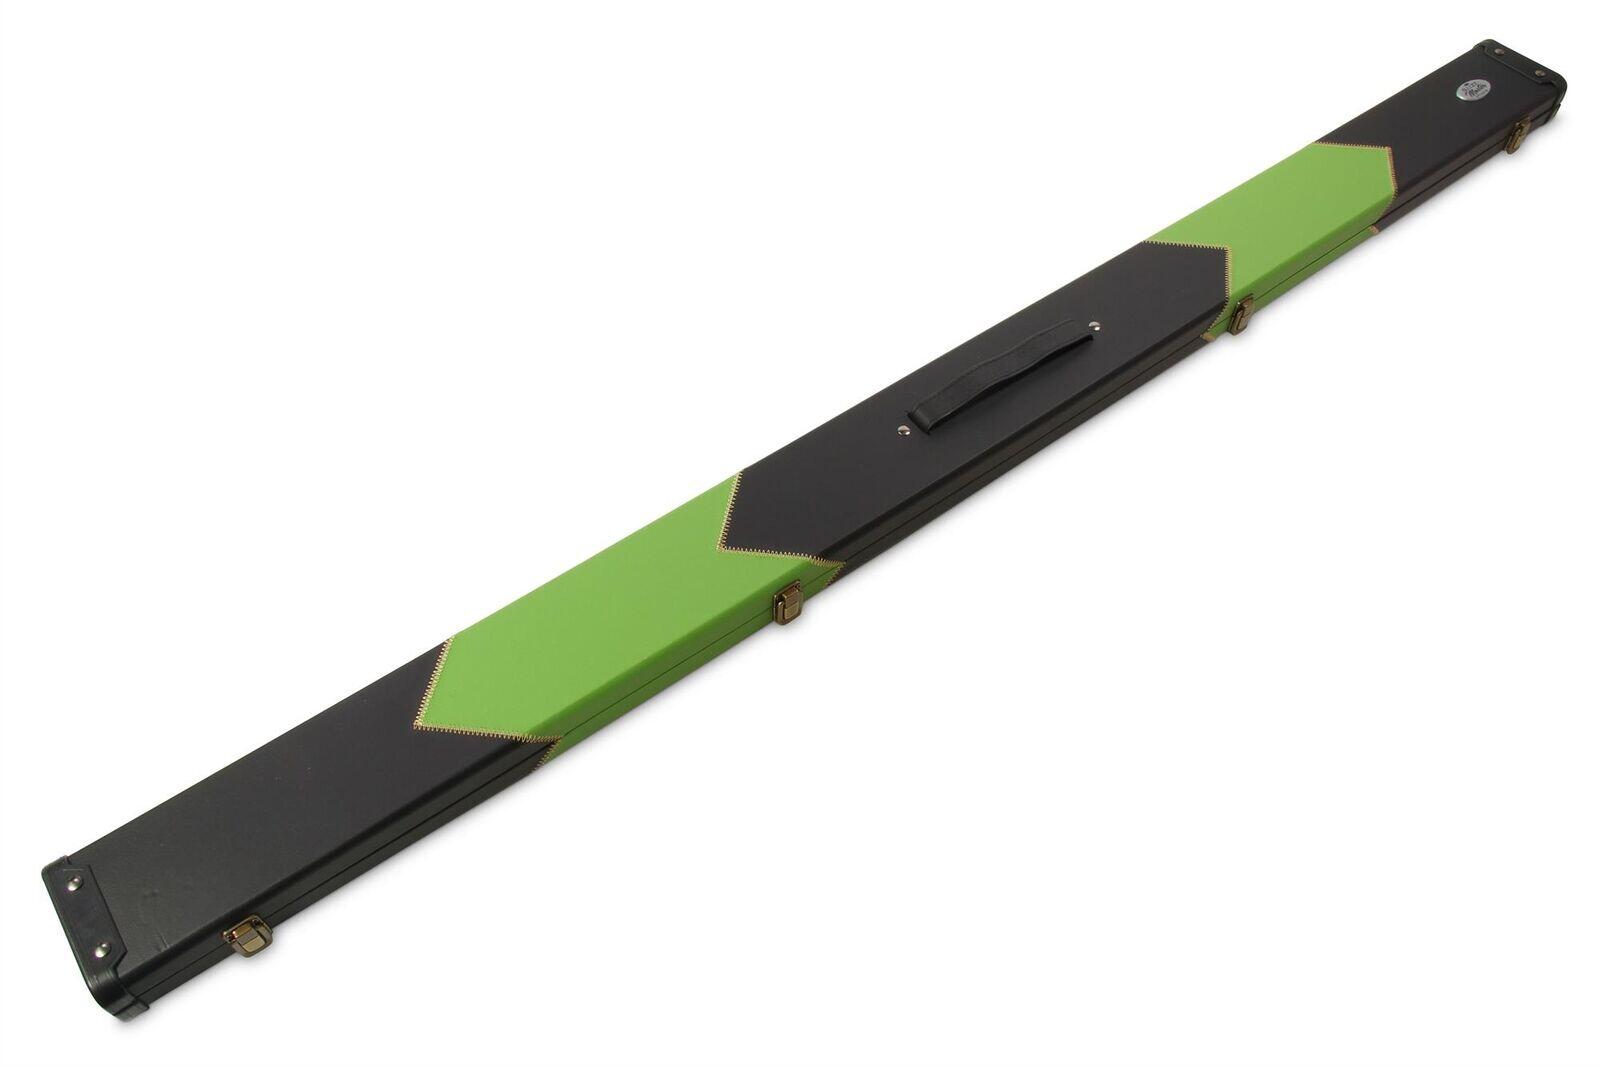 Baize Master 1 Piece WIDE GREEN ARROW Snooker Pool Cue Case - Holds 3 Cues 2/7